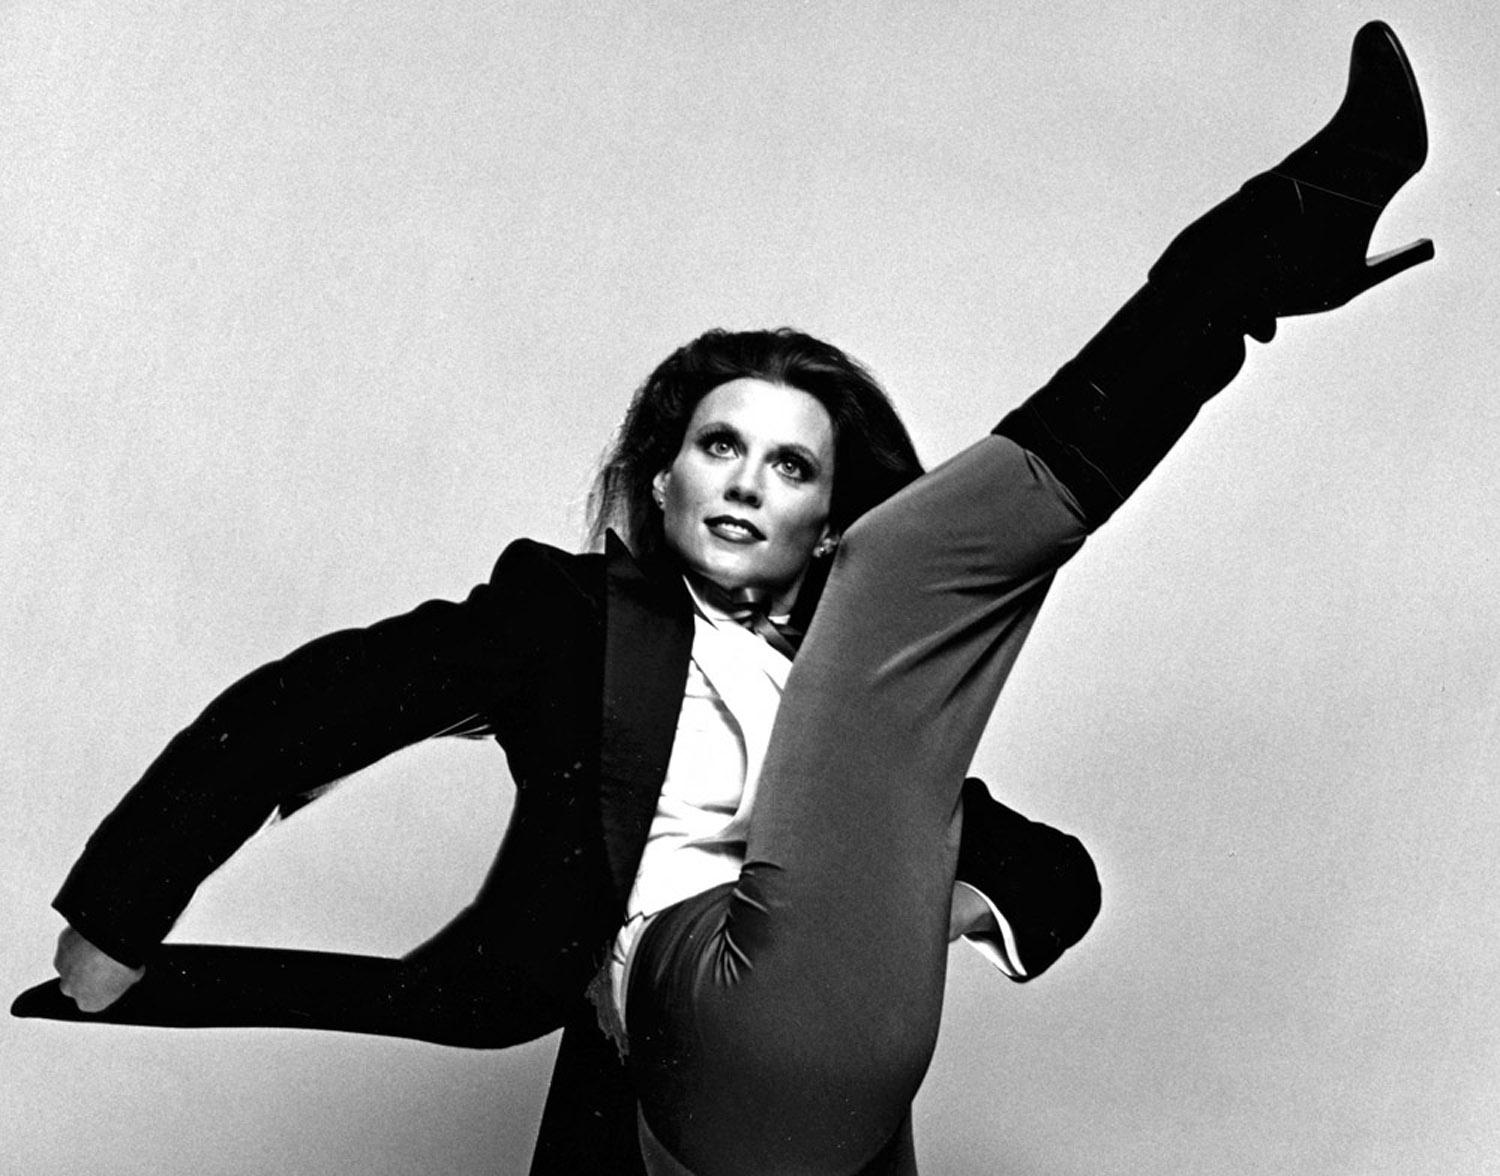 Details about   VINTAGE 8 X 10 PHOTOGRAPH FROM IRVING KLAWS ARCHIVES OF ANN REINKING LOT #6 